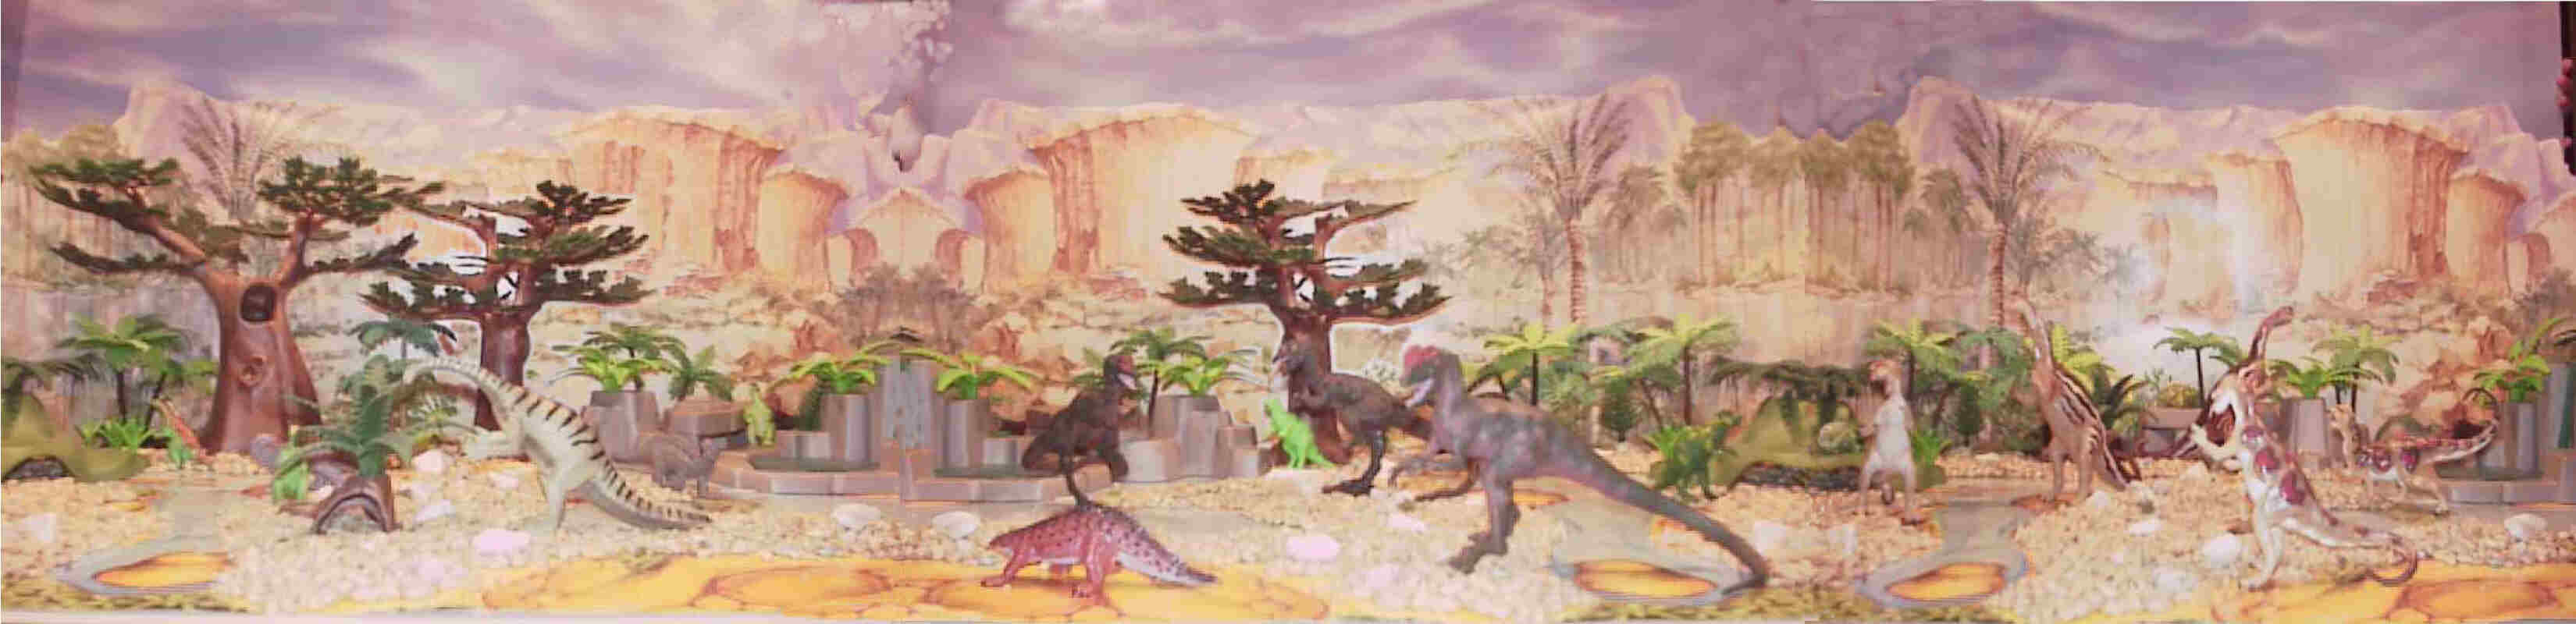  PlayVision produced several lines of figures left center is the  AMERICAN MUSEUM OF NATURAL HISTORY Plateosaurus, left two of their Plateosaurusfrom their mini line. The grey Scelidosaurus is from the Oriental   Trading Company.